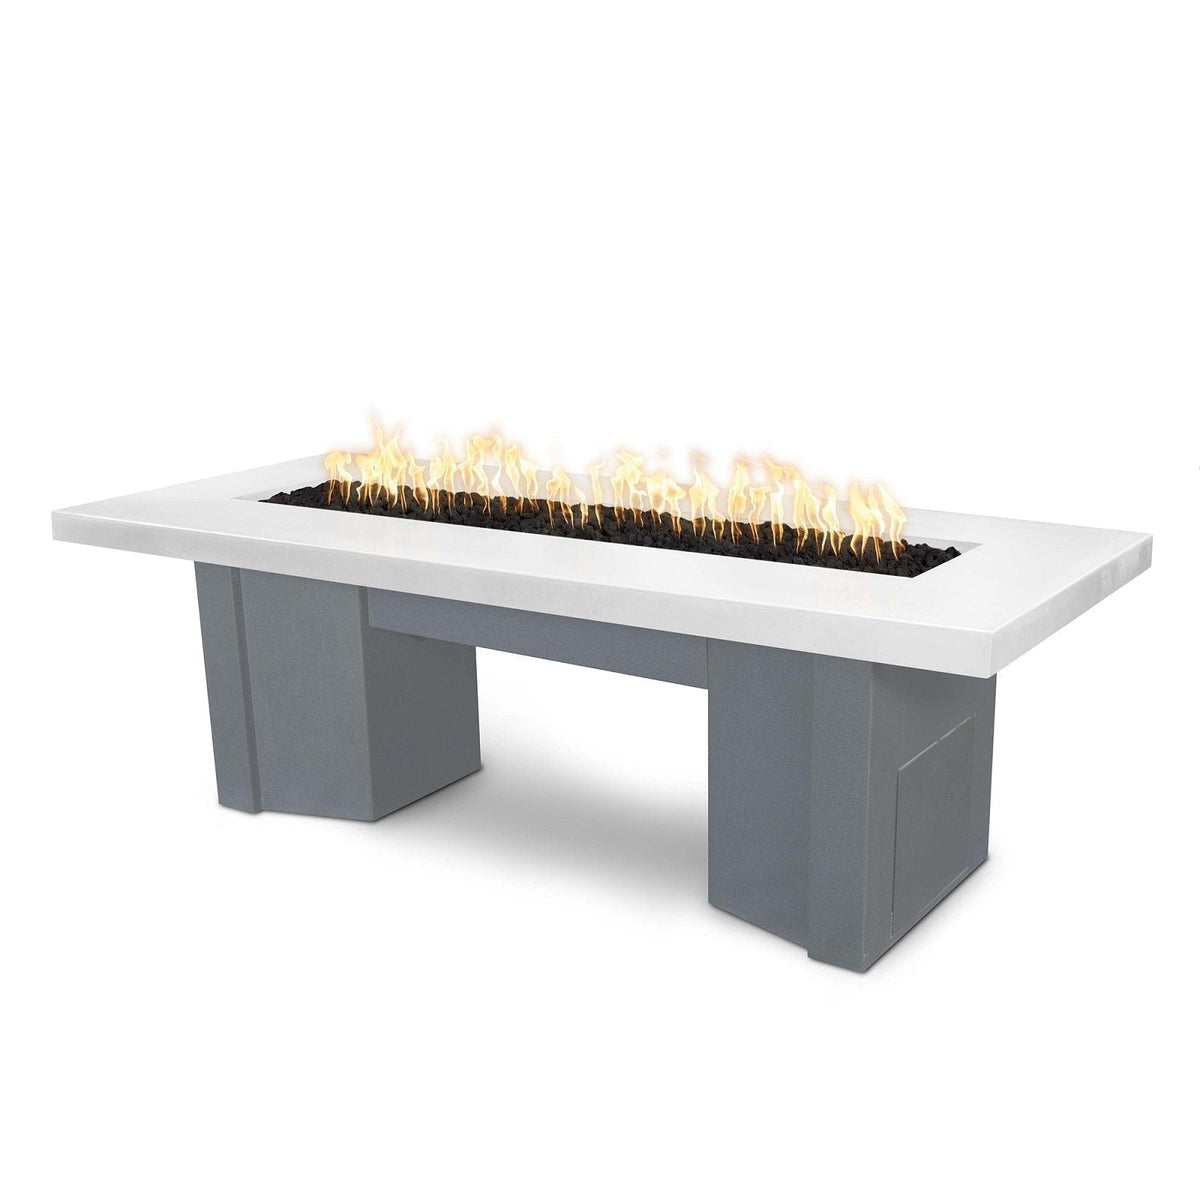 The Outdoor Plus Fire Features Limestone (-LIM) / Gray Powder Coated Steel (-GRY) The Outdoor Plus 60&quot; Alameda Fire Table Smooth Concrete in Liquid Propane - Match Lit with Flame Sense System / OPT-ALMGFRC60FSML-LP